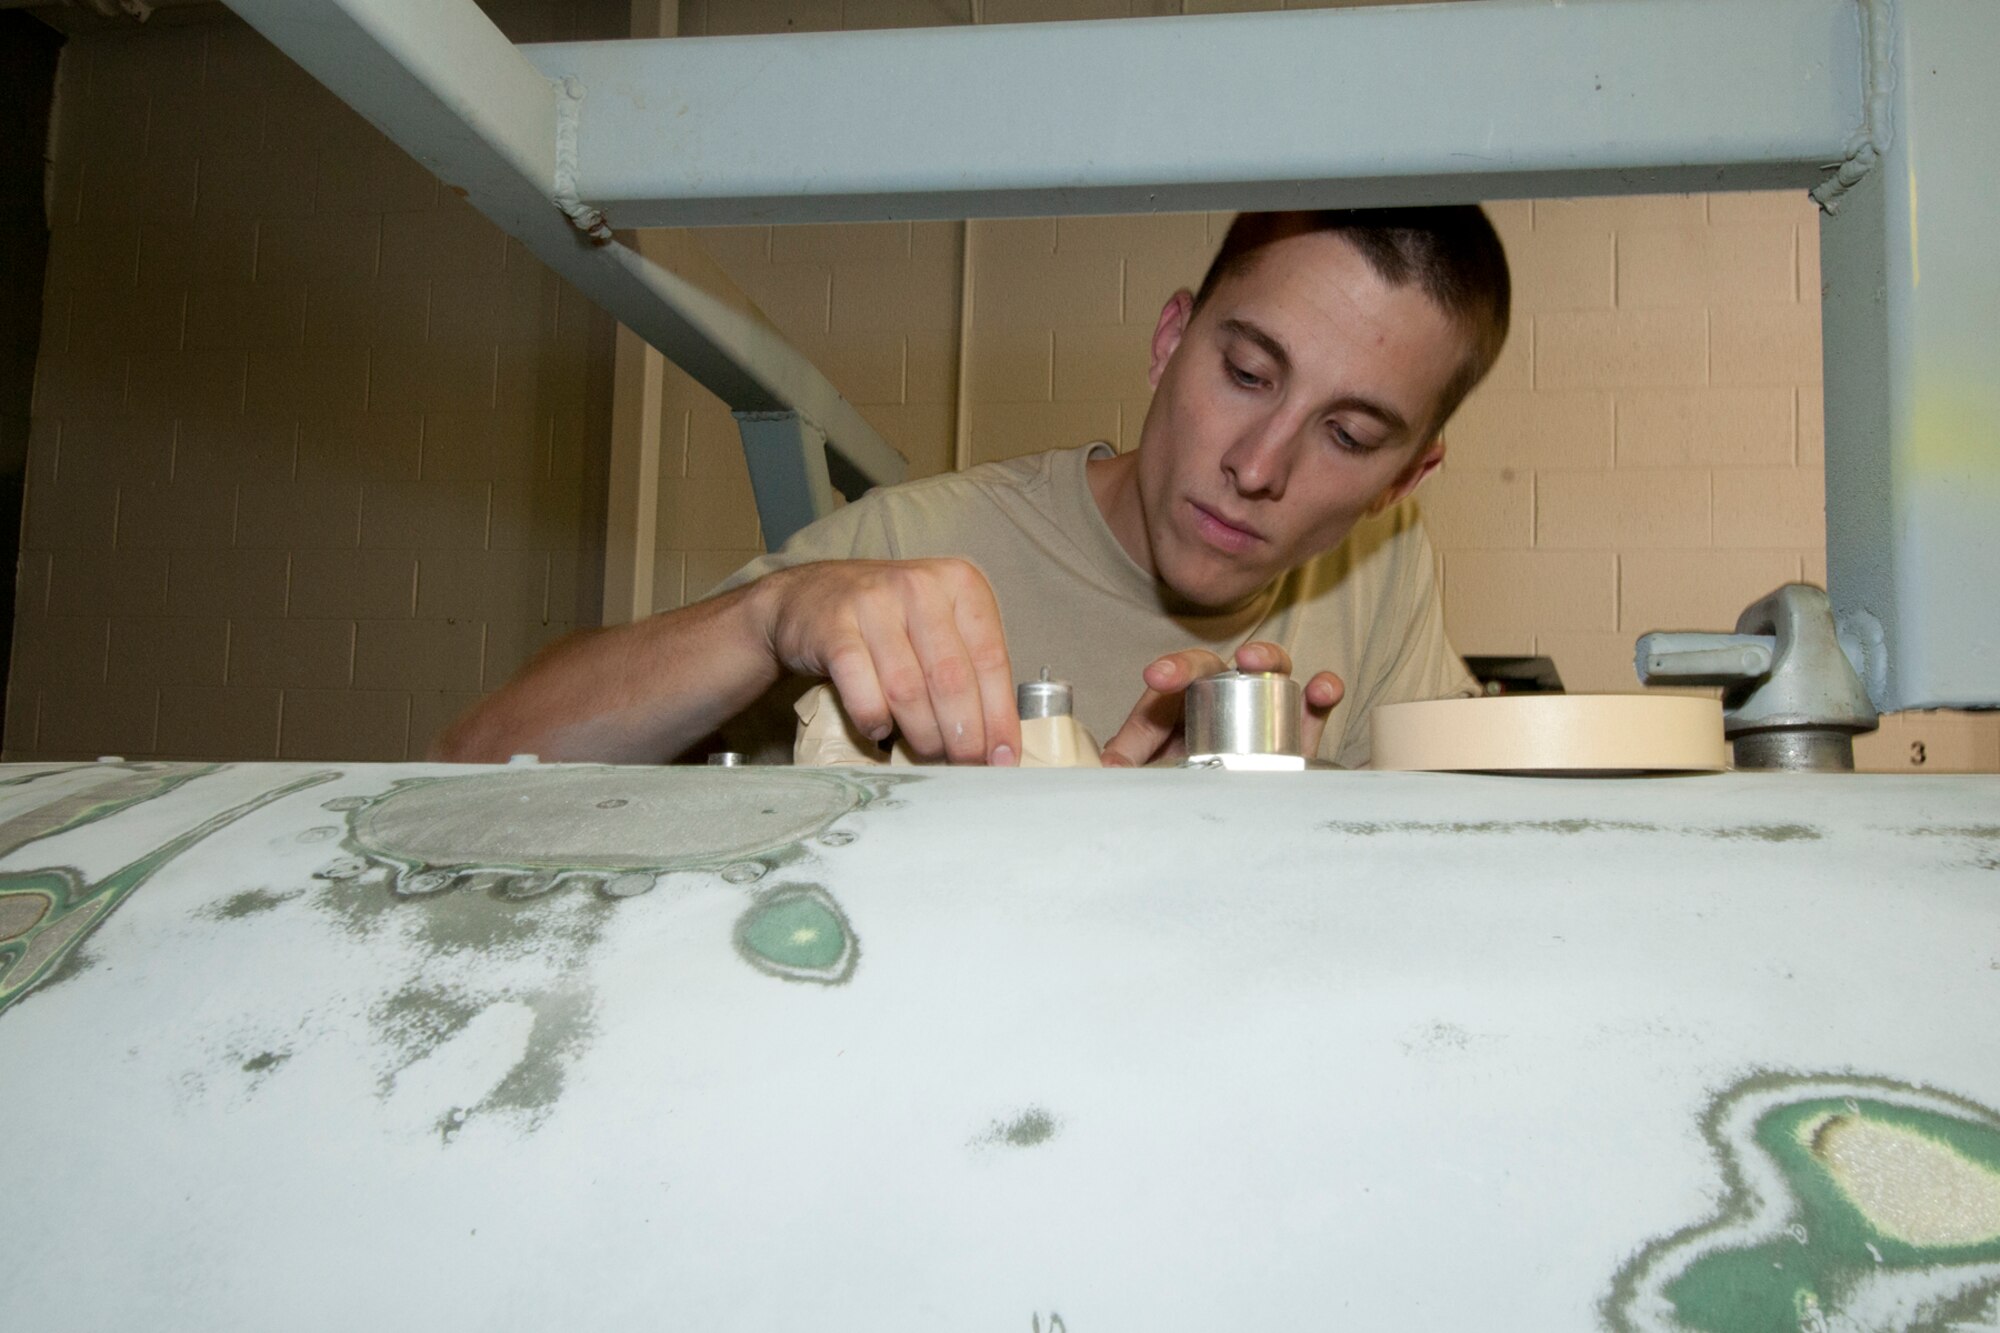 Airman 1st Class Mitchell Groh tapes off a part of a centerline tank that must remain paint-free as part of the preparation work for painting the tank while working in the painting bay of the 127th Maintenance Squadron at Selfridge Air National Guard Base, Mich., Sept. 15, 2012. While maintenance Airmen at the base said the paint on an aircraft plays a major role in corrosion control and has other benefits, they also take a great deal of pride in the appearance of the aircraft they maintain.  The centerline tank is used by A-10 Thunderbolt II aircraft assigned to the base as an additional, external fuel tank when the aircraft must make long treks, such as a trip overseas. (Air National Guard photo by TSgt. Robert Hanet)